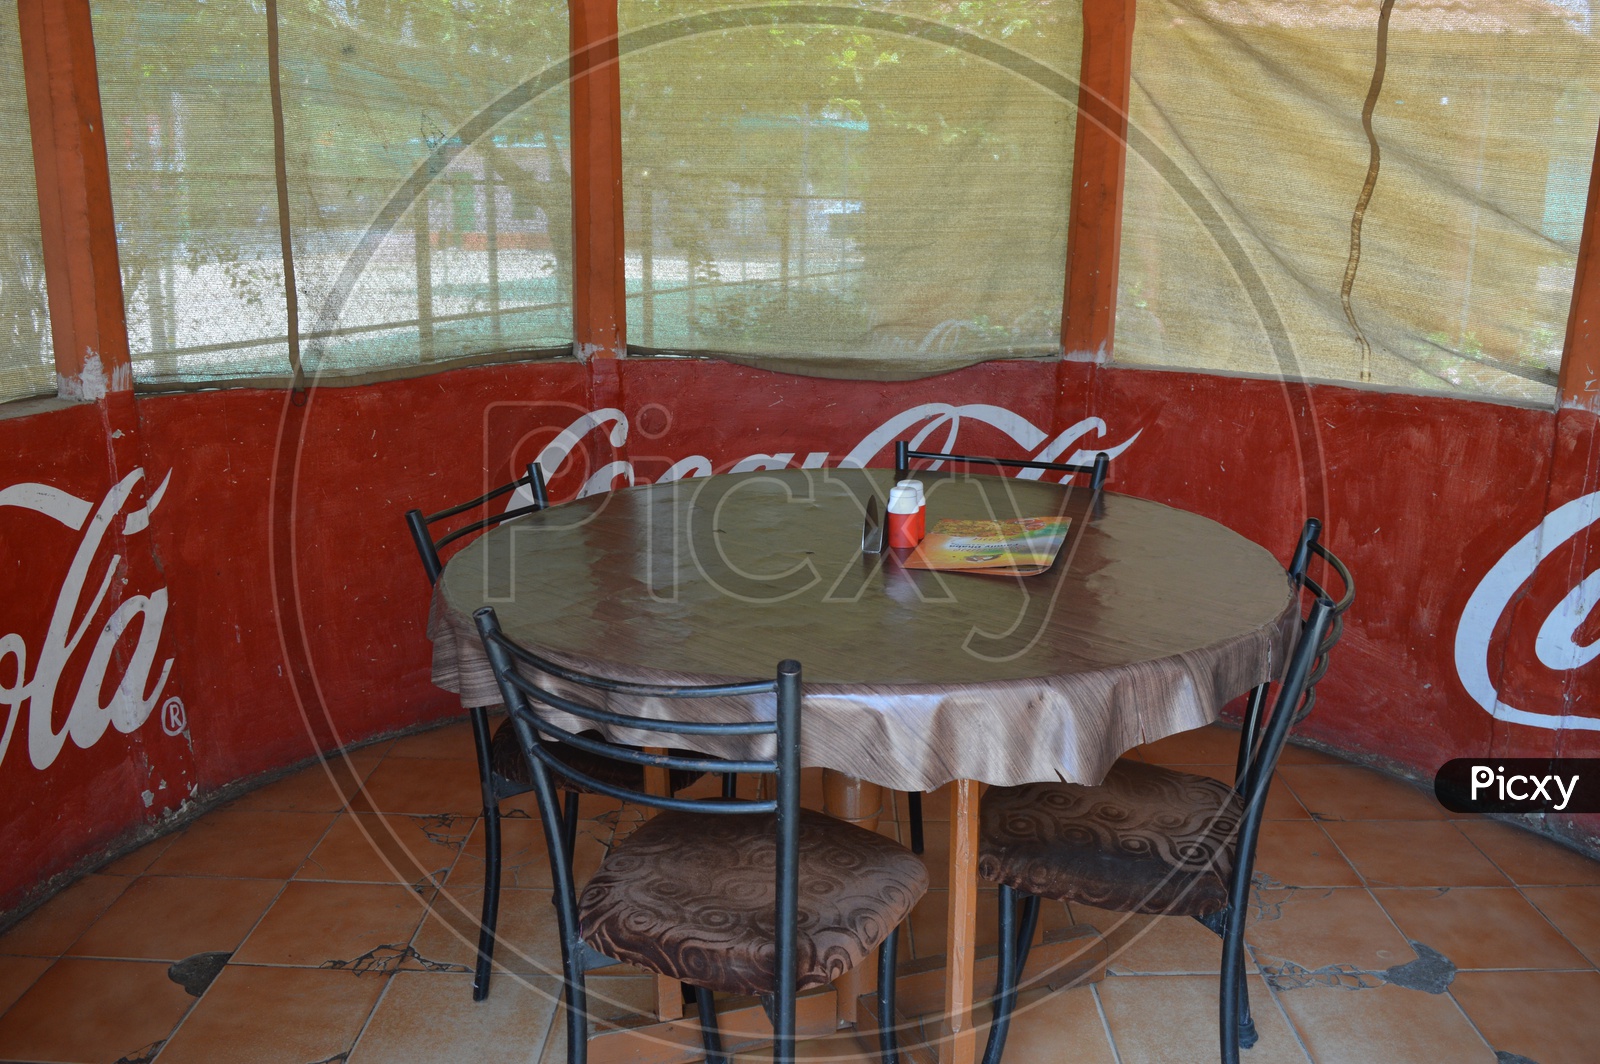 Dining Tables And Chairs In a Dhaba restaurant